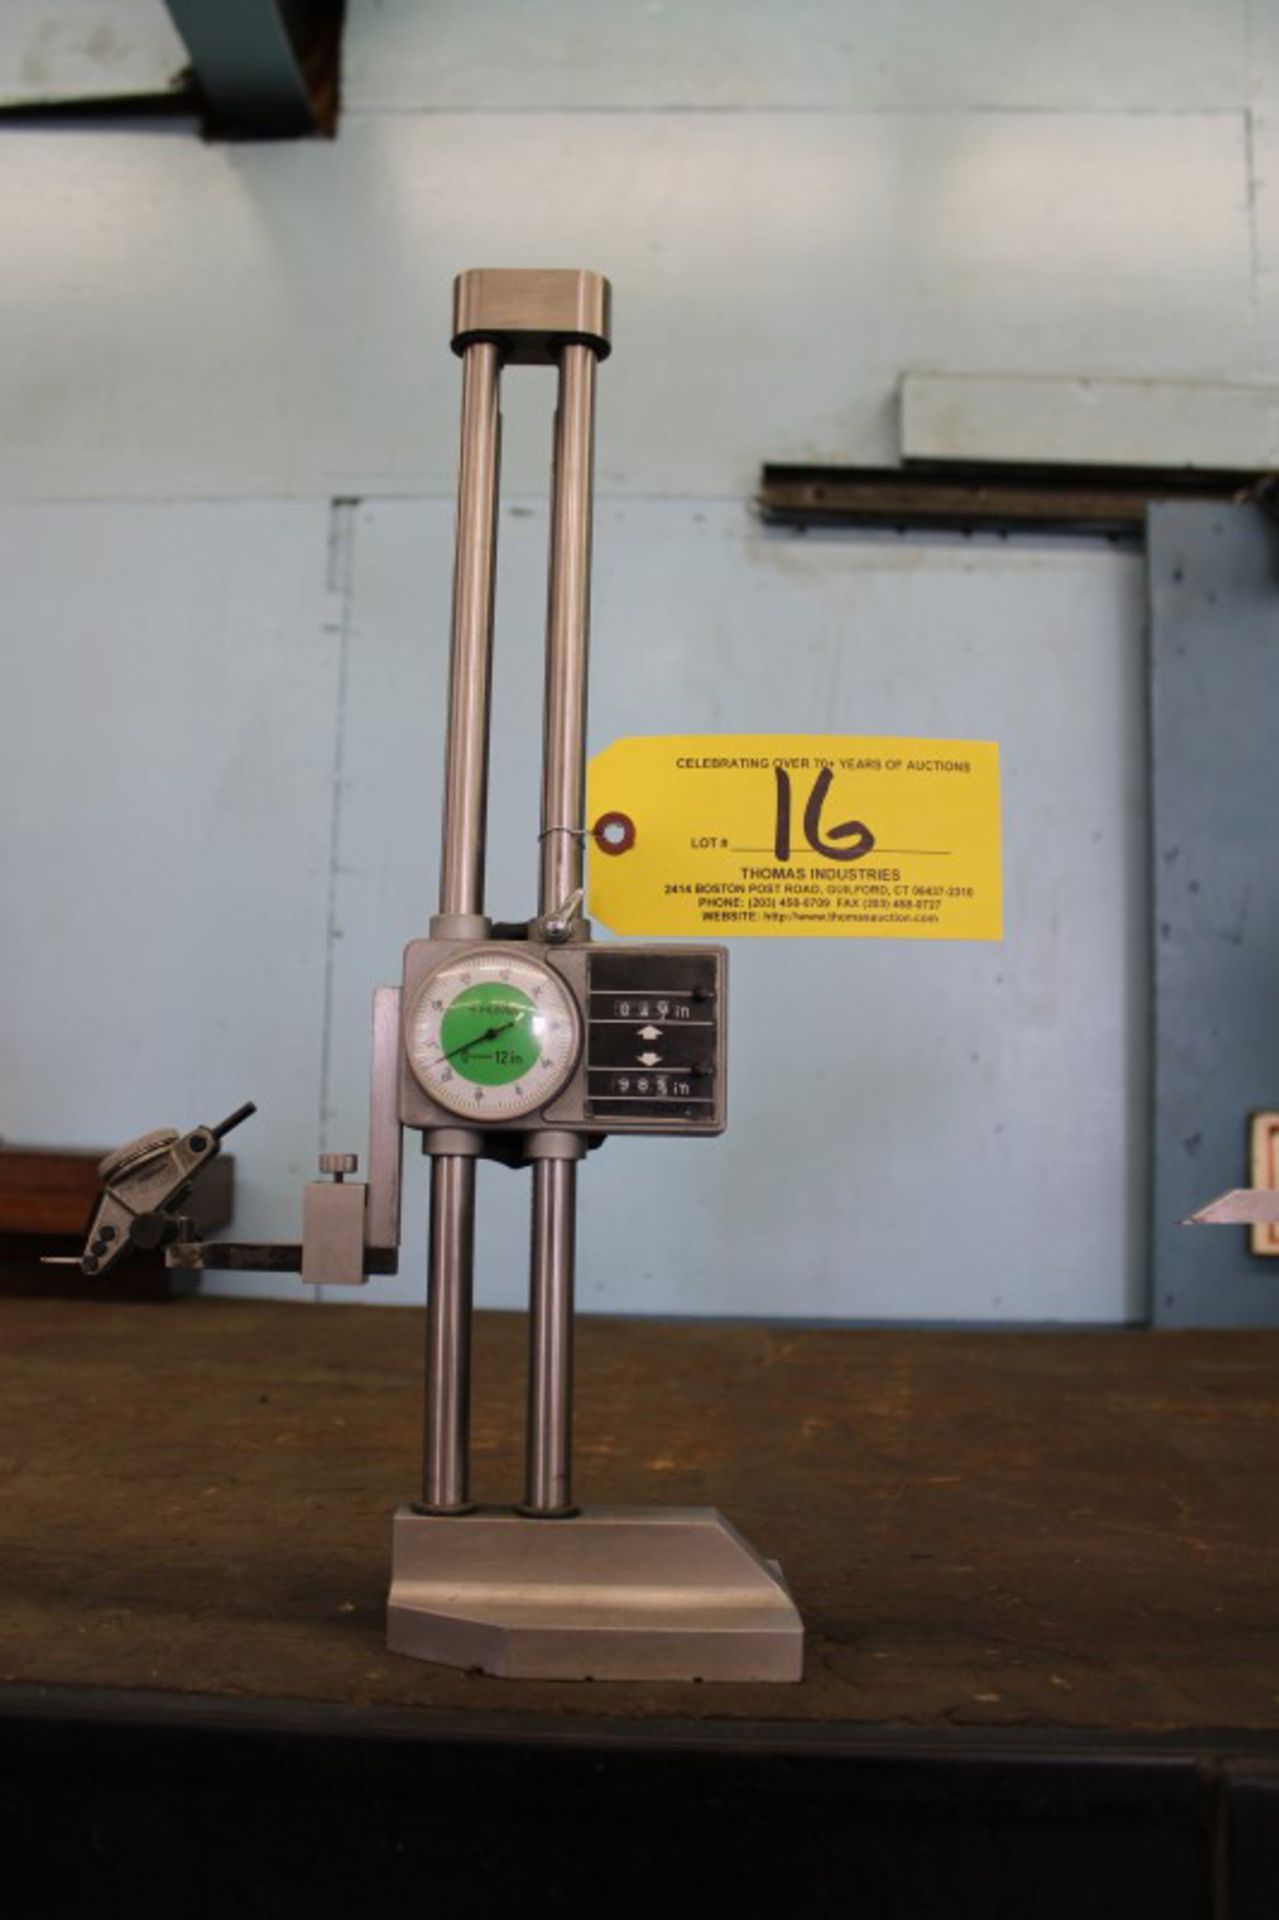 0" to 12" Anilog Dial Height Gage